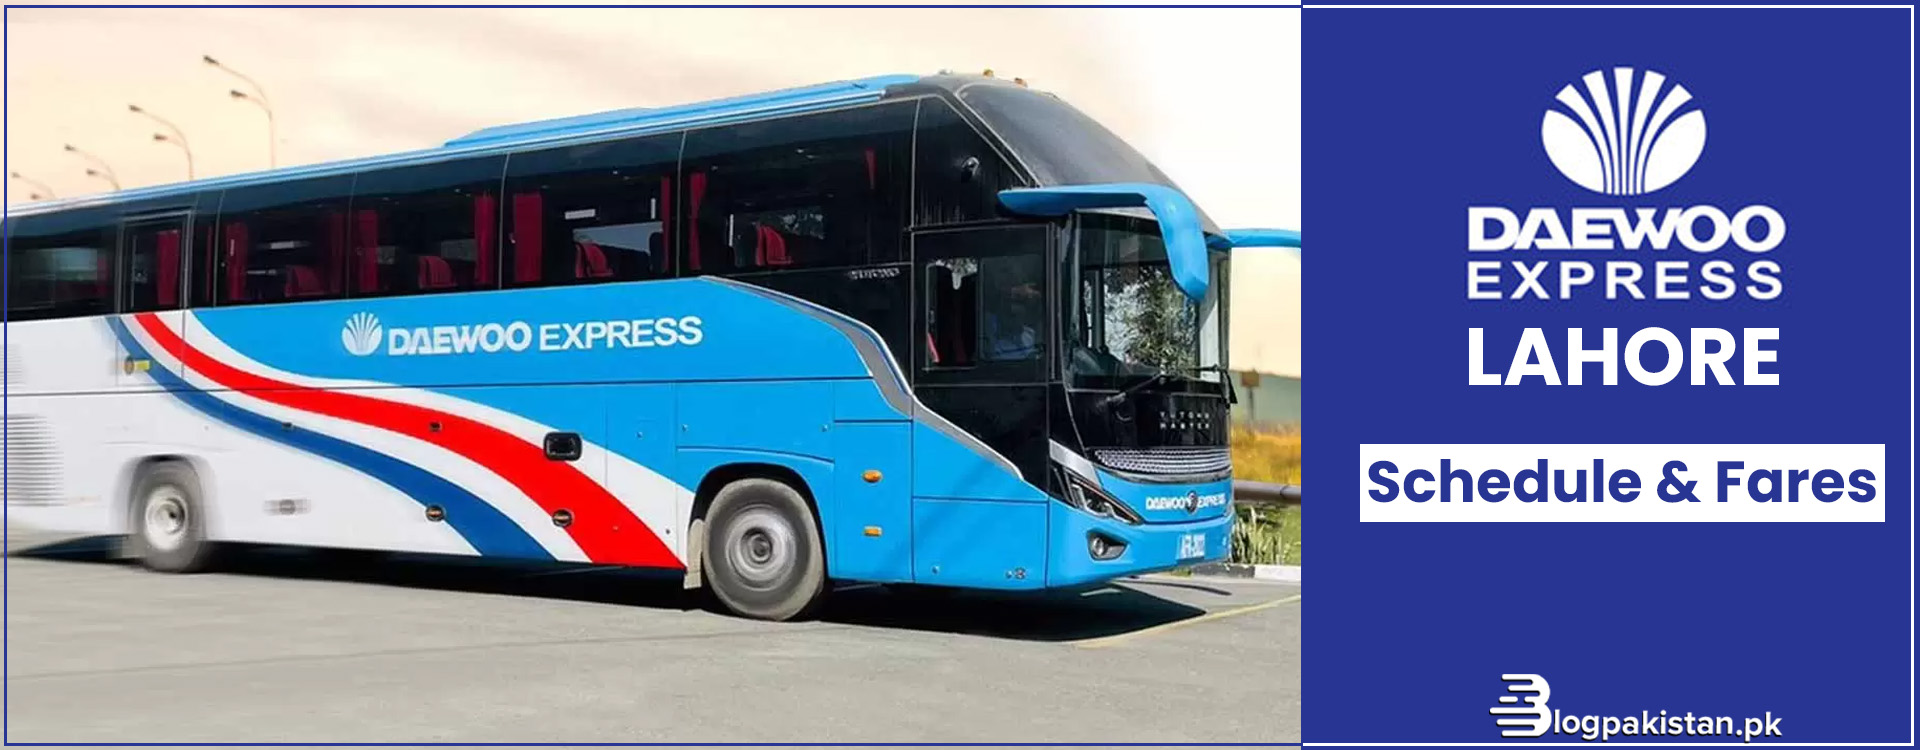 Daewoo Express Lahore Timetable: Fares, Schedules & Bus Types